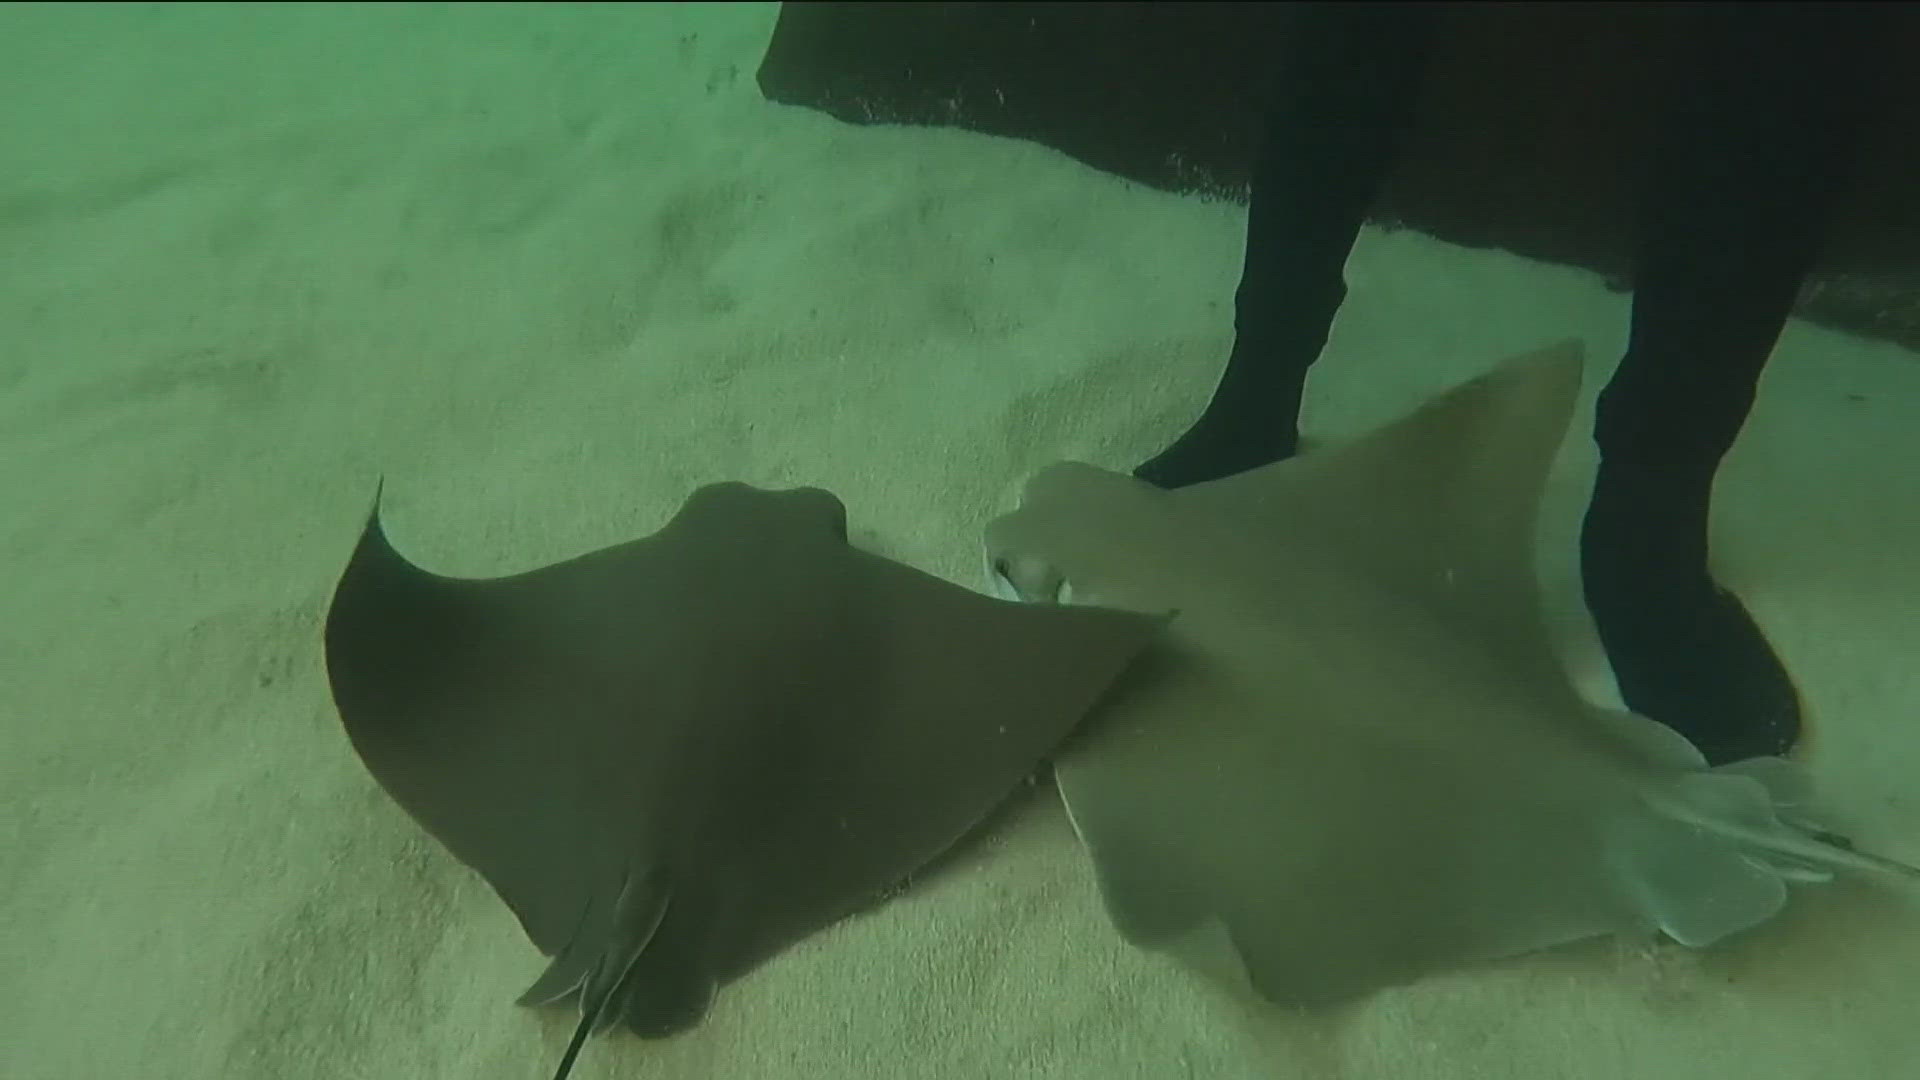 Keep your eyes, and feet, peeled for stingrays this summer. Coronado lifeguards have treated about 10 to 25 stingray injuries a day over the past few weeks.